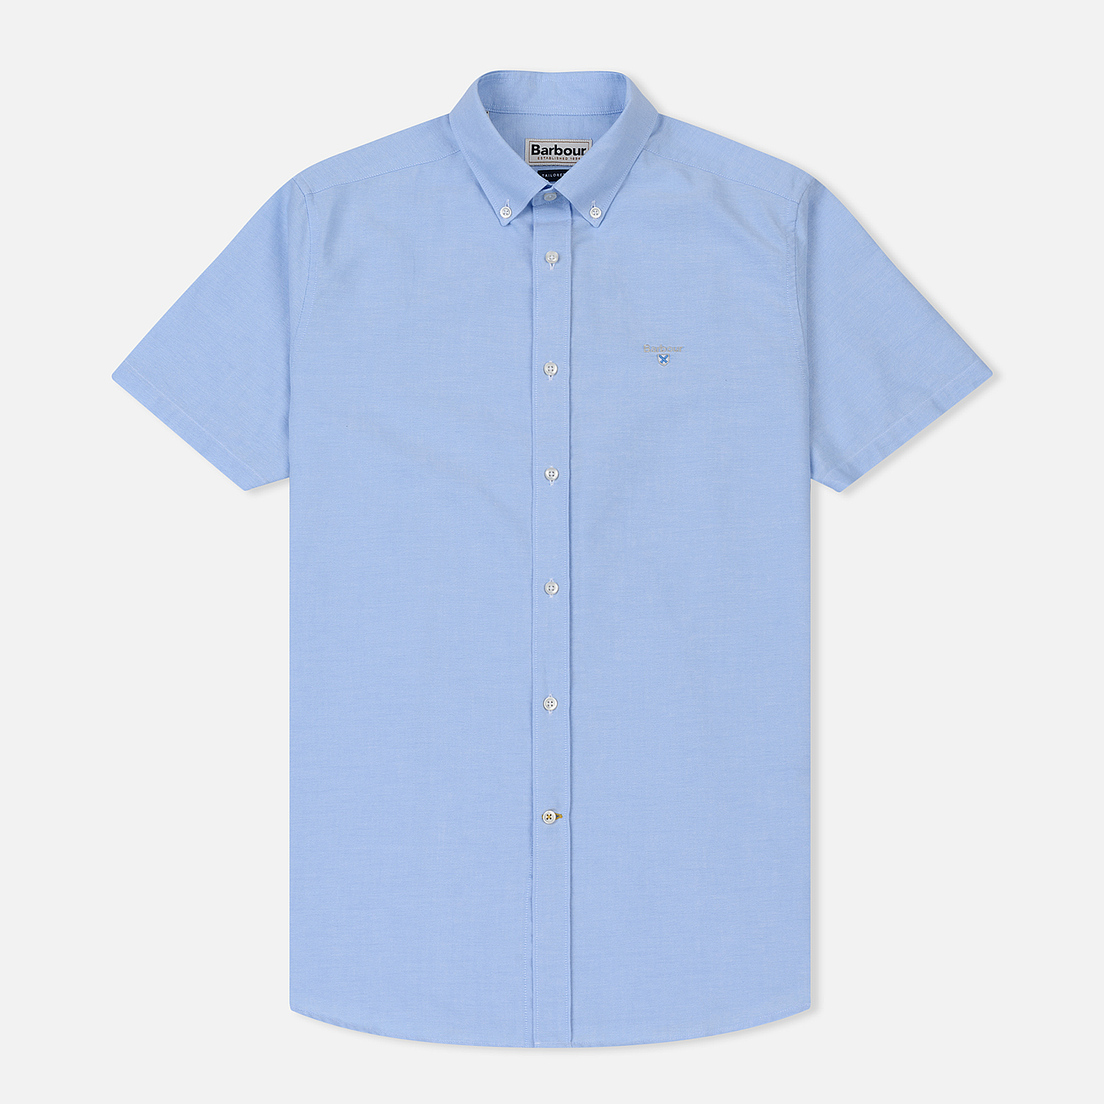 Barbour Мужская рубашка Oxford S/S Tailored